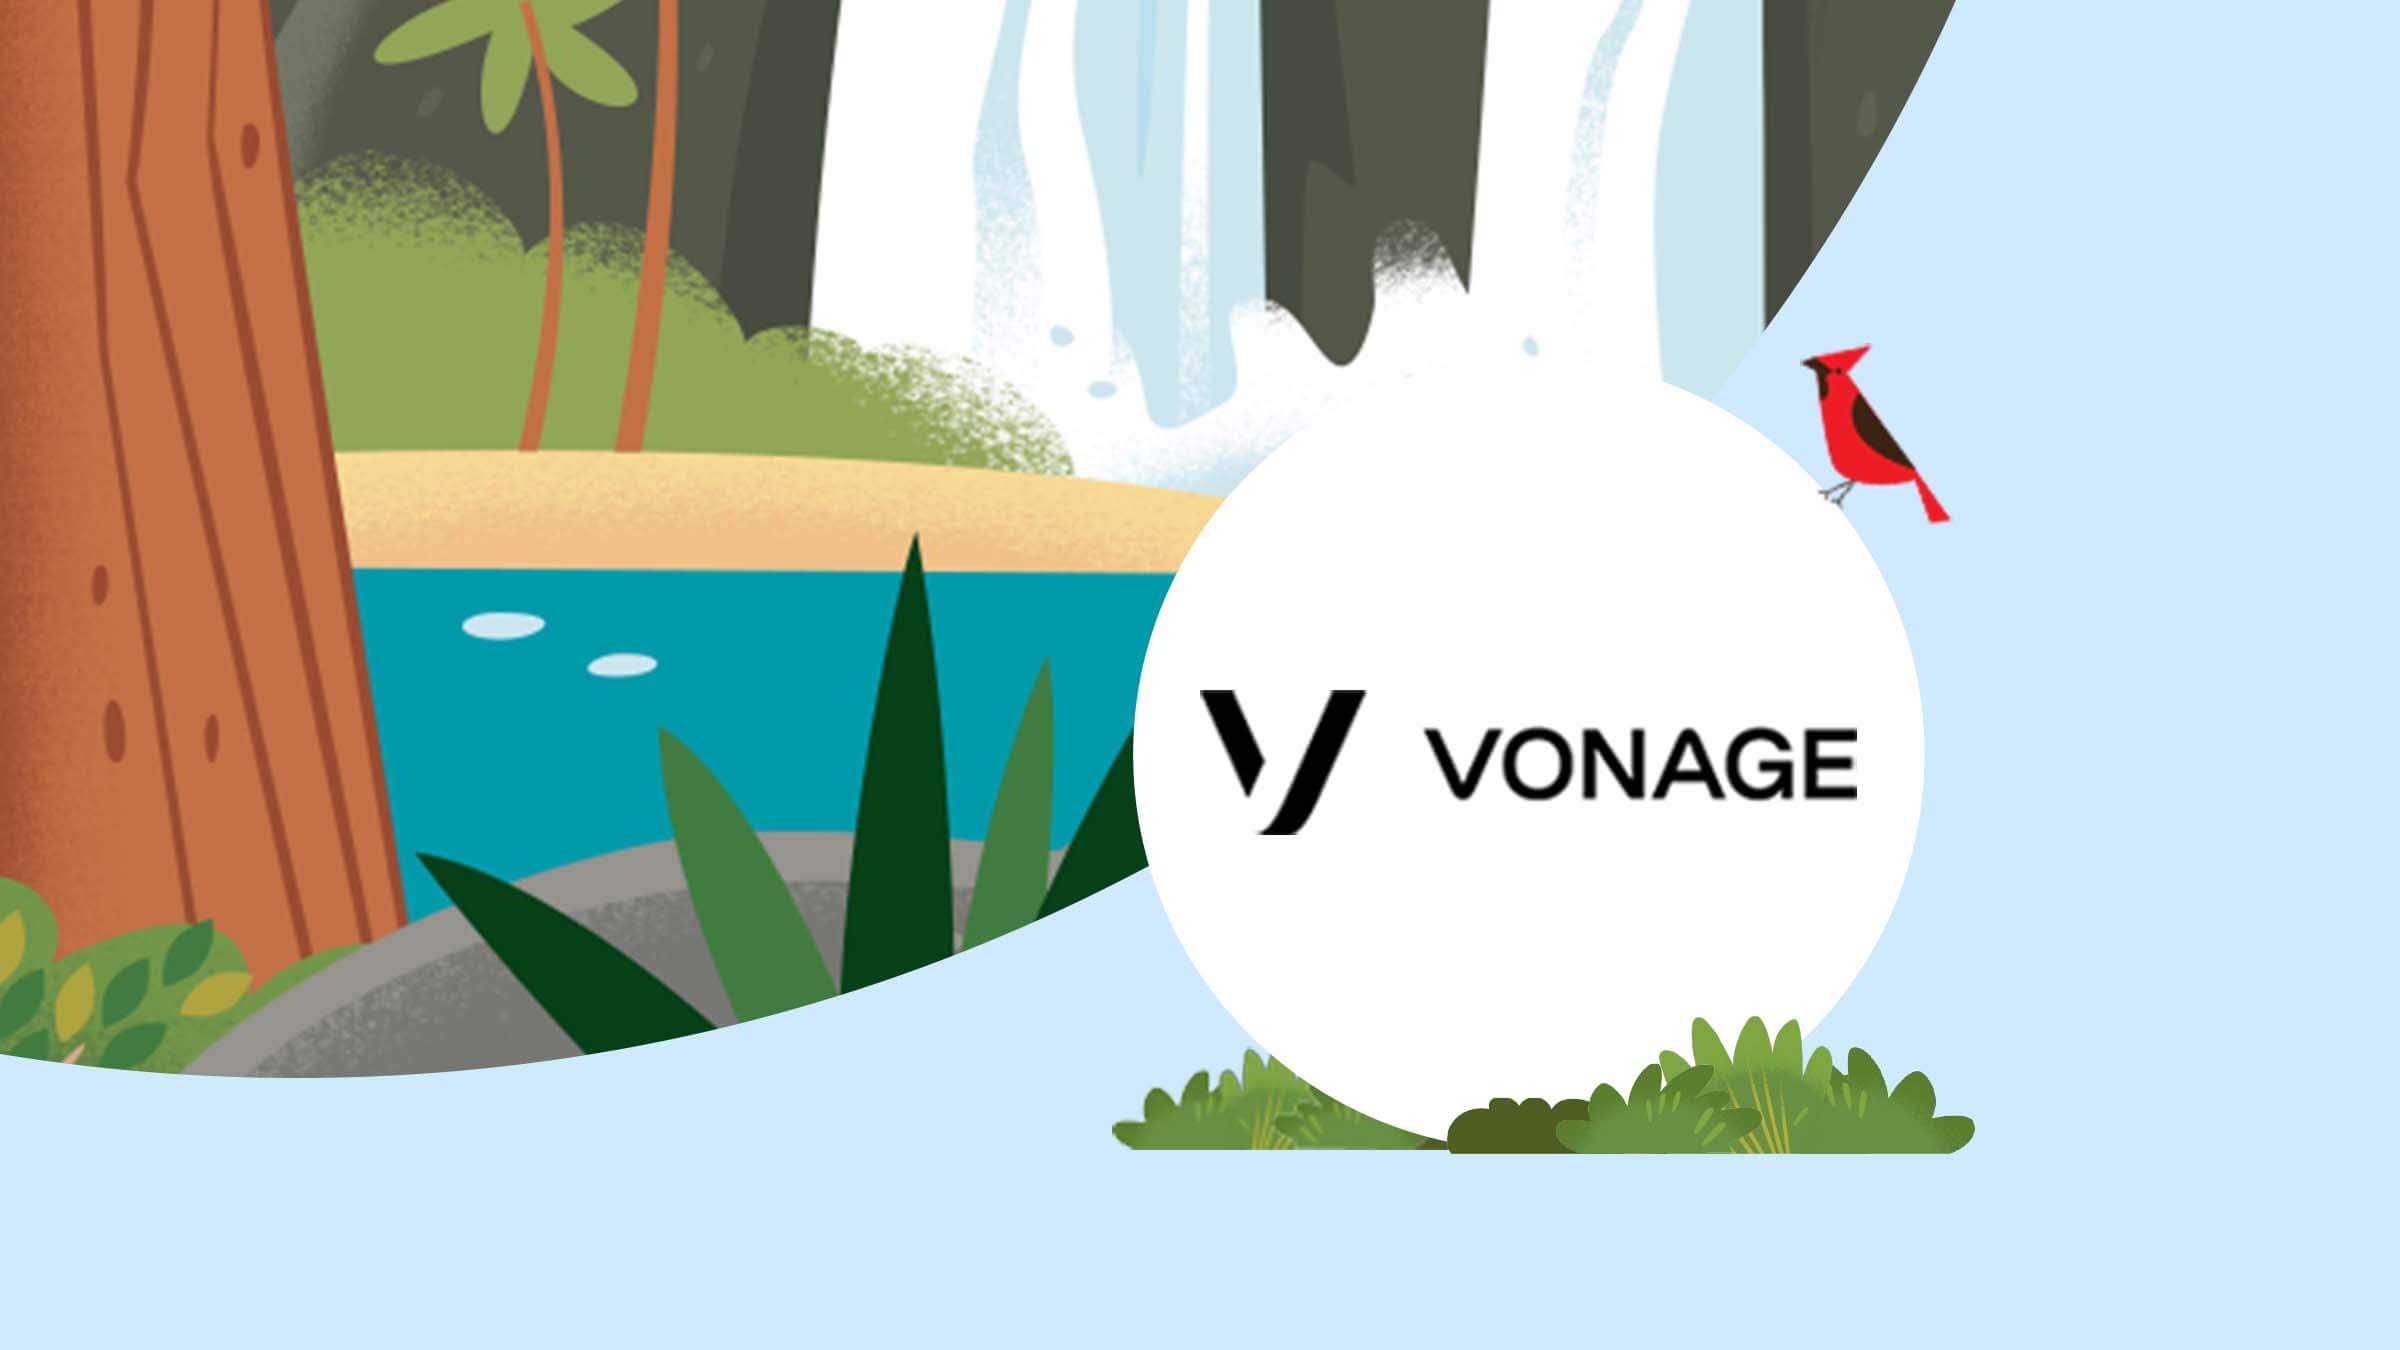 From 4 days to 4 minutes—how Vonage uses automation to respond faster.